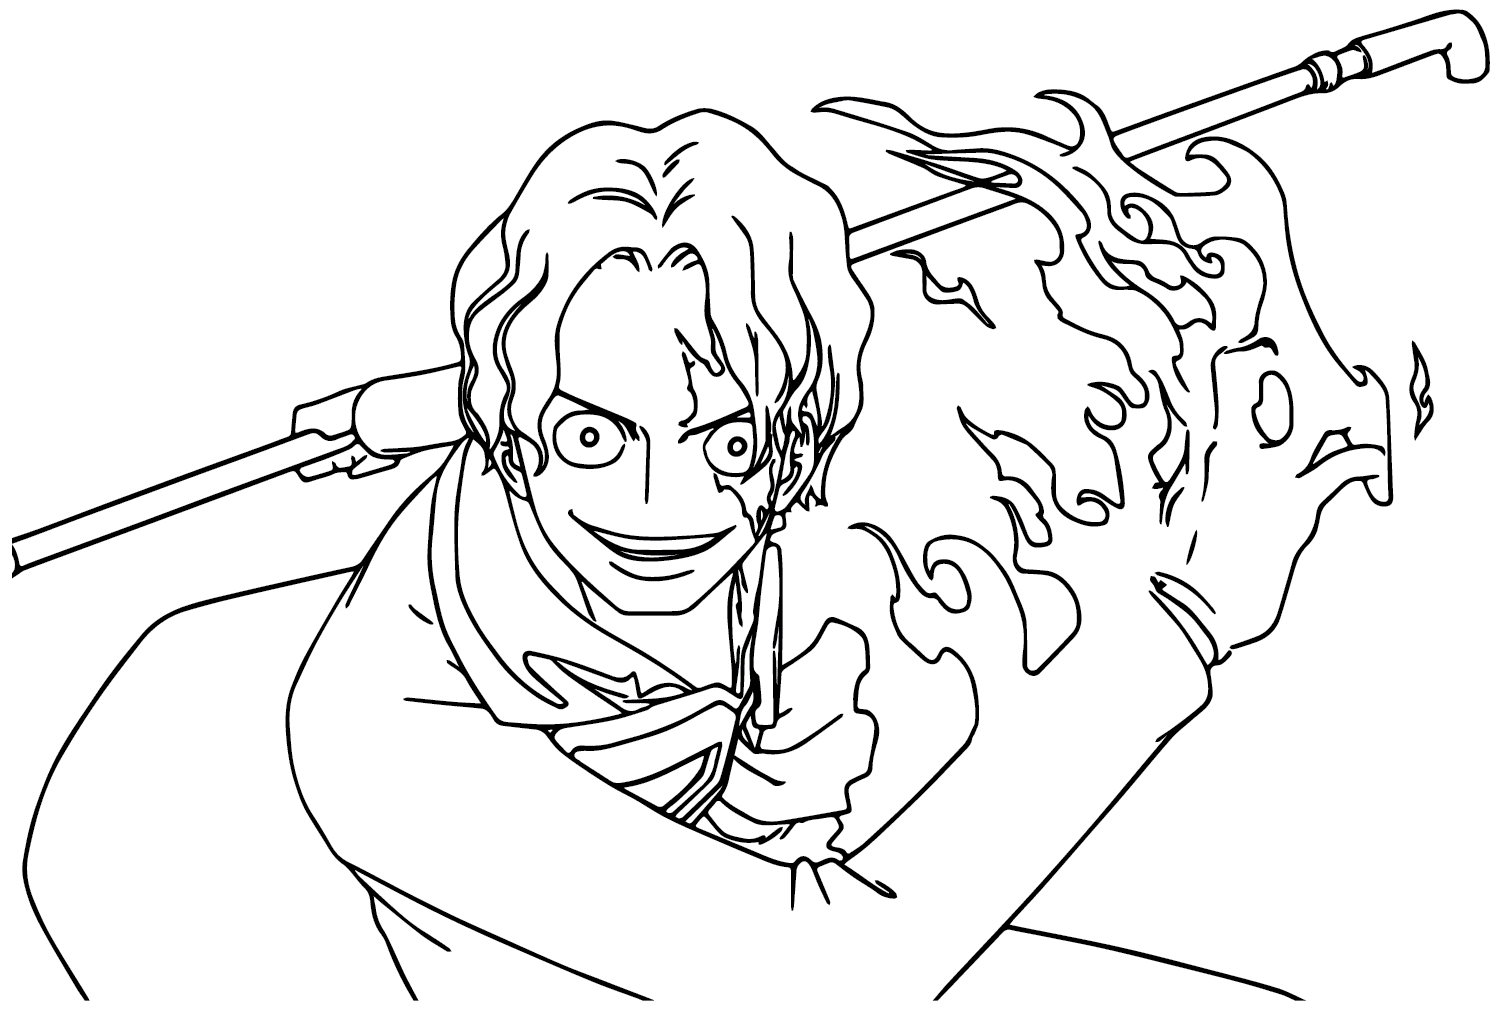 Sabo from One Piece Coloring Page from Sabo